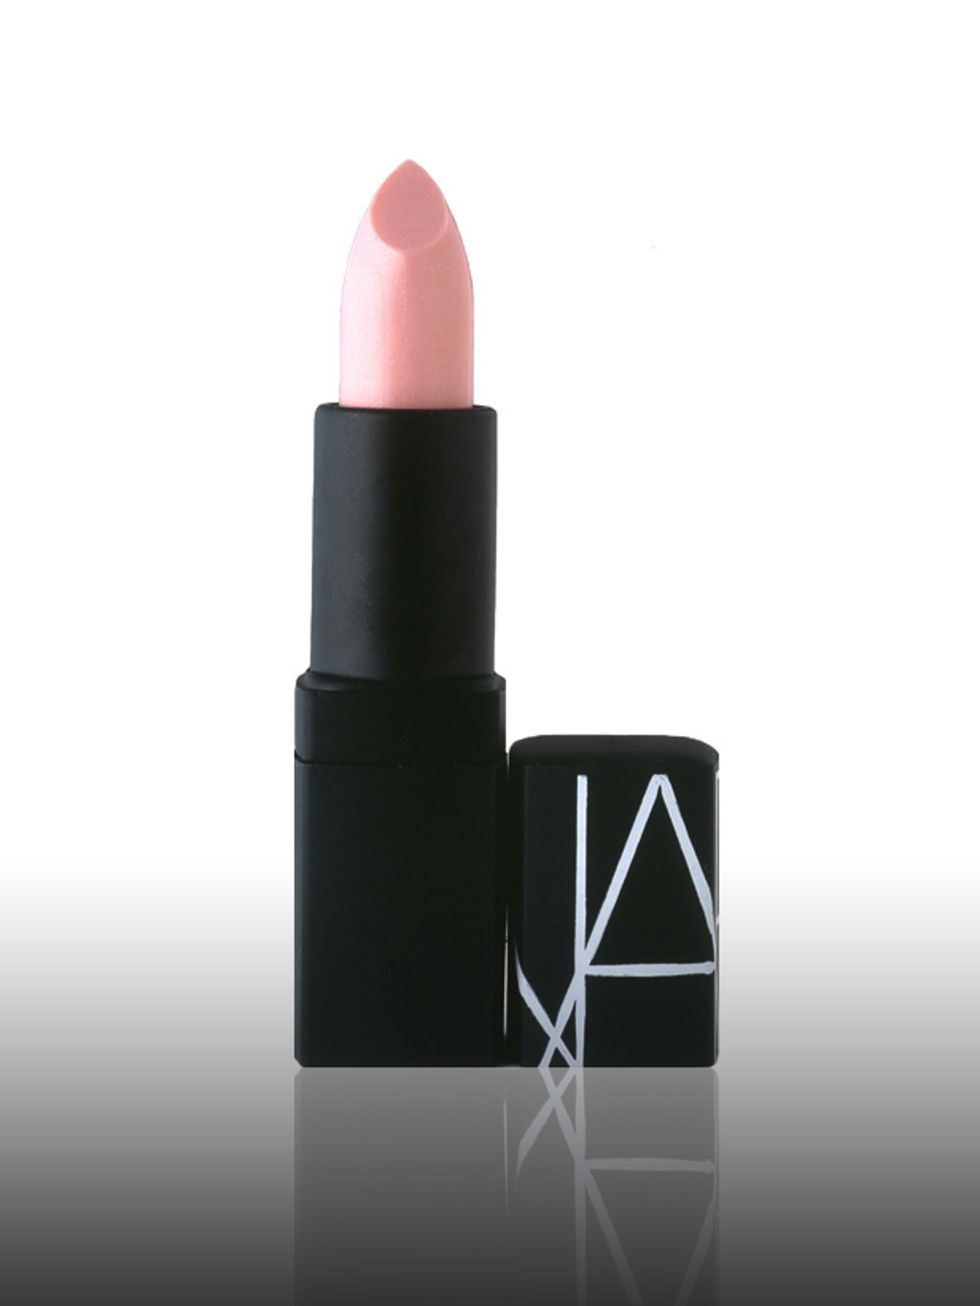 <p>Lipbalm SPF 20 in Sabrina, £17 by <a href="http://www.narscosmetics.co.uk/Lip-Balm-C227_category_3.aspx">Nars</a> </p><p>Nude lip colours are a beauty must this season and Alexa loves 'Sabrina' by Nars. It has SPF which is a must for Alexa and 'it look